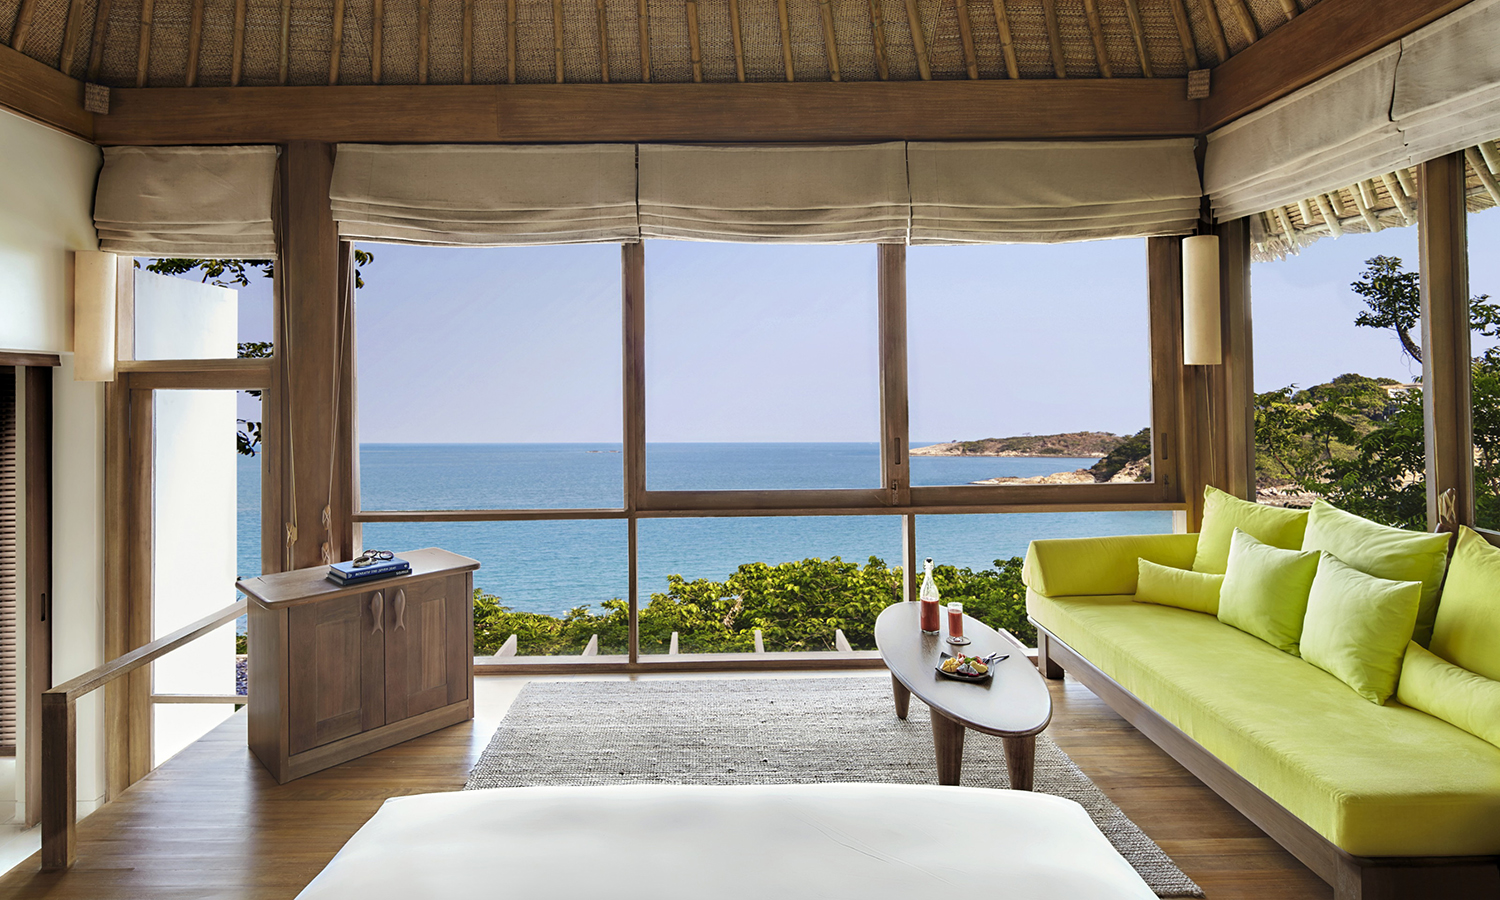 The 10 most stunning beach resorts you have to see